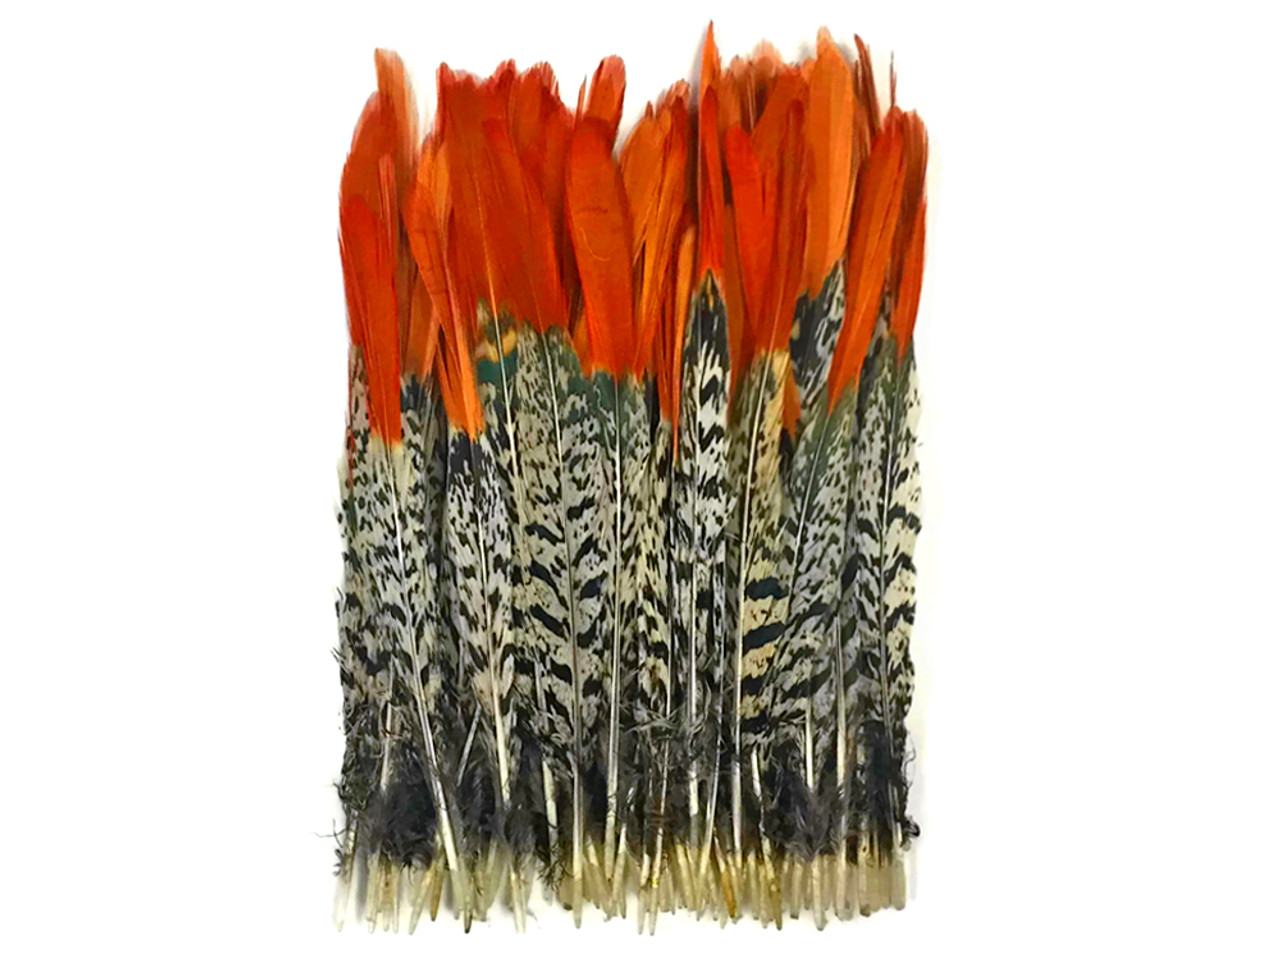 5 Pcs LADY AMHERST PHEASANT Feathers 4-12 RED TIP! Top Quality!  Craft/Hats/Pads